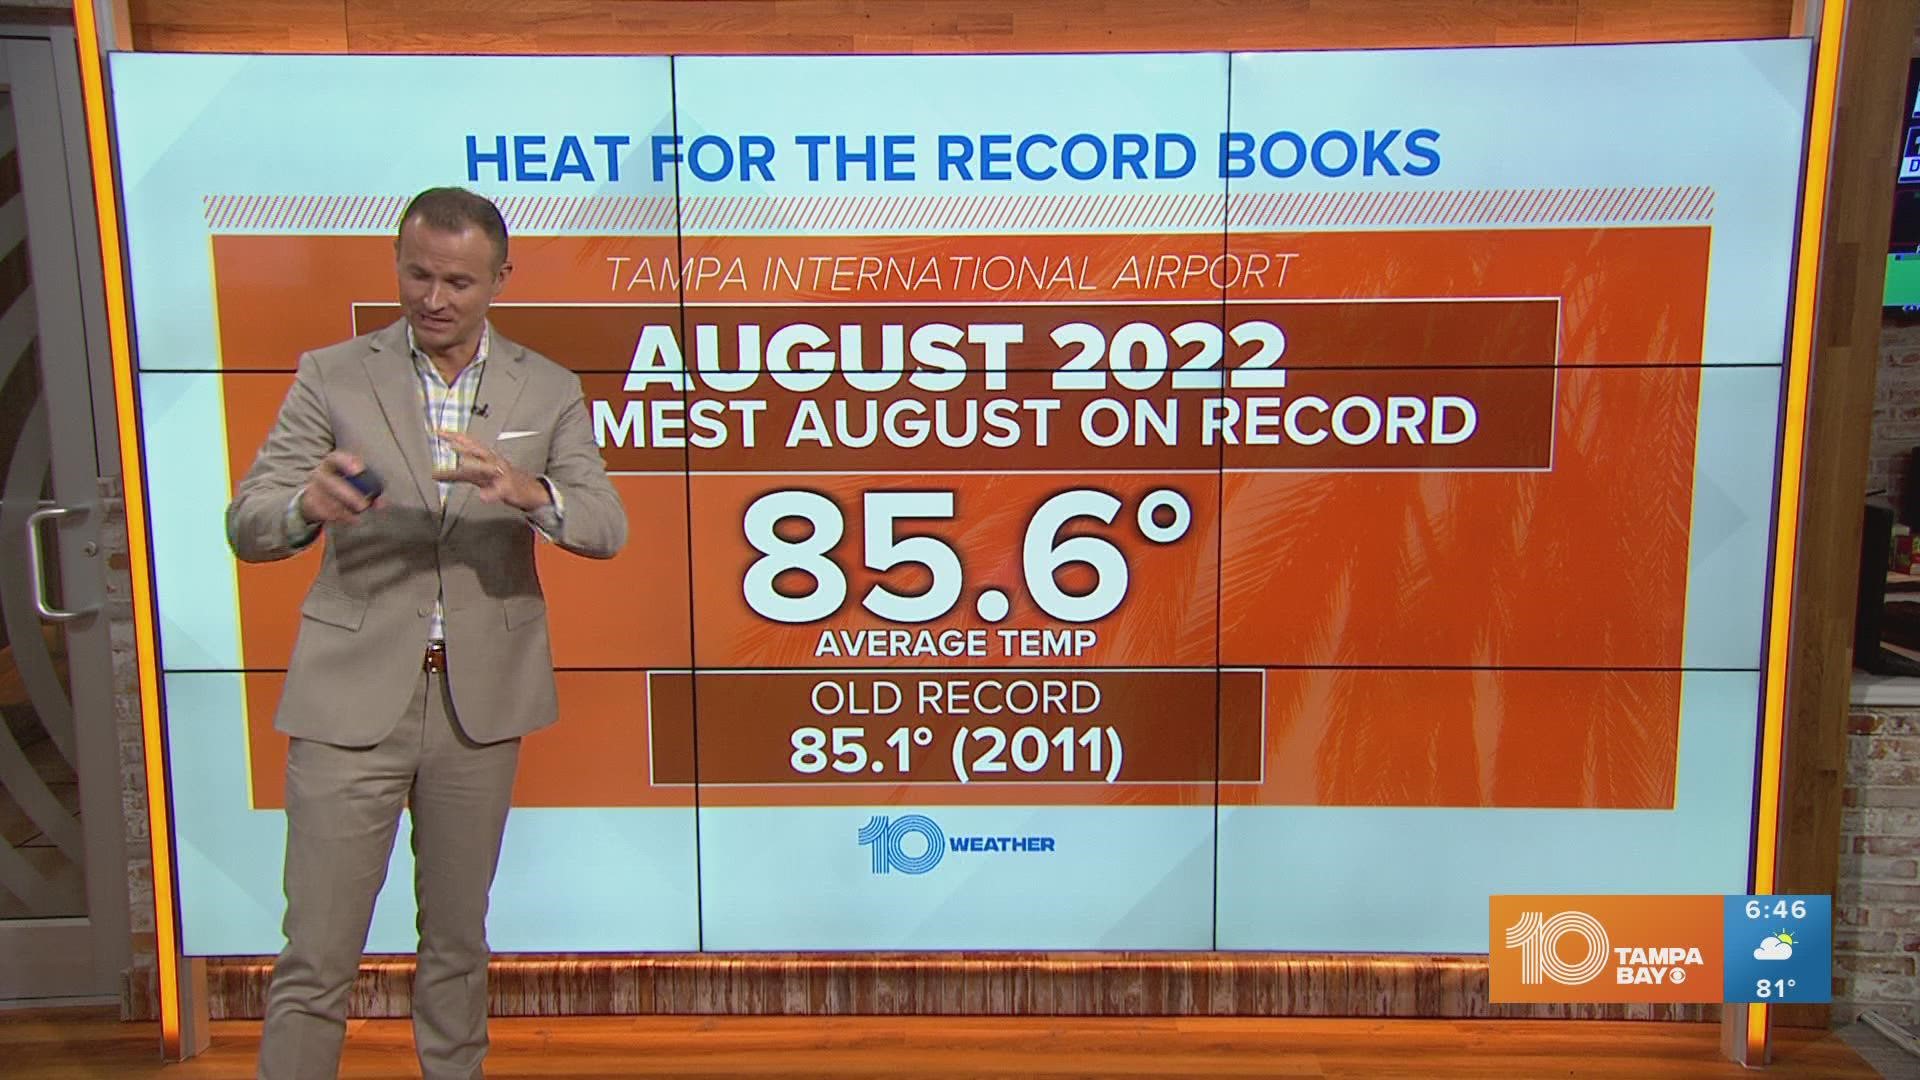 This past August was also the hottest August in recorded history in the Tampa Bay area.